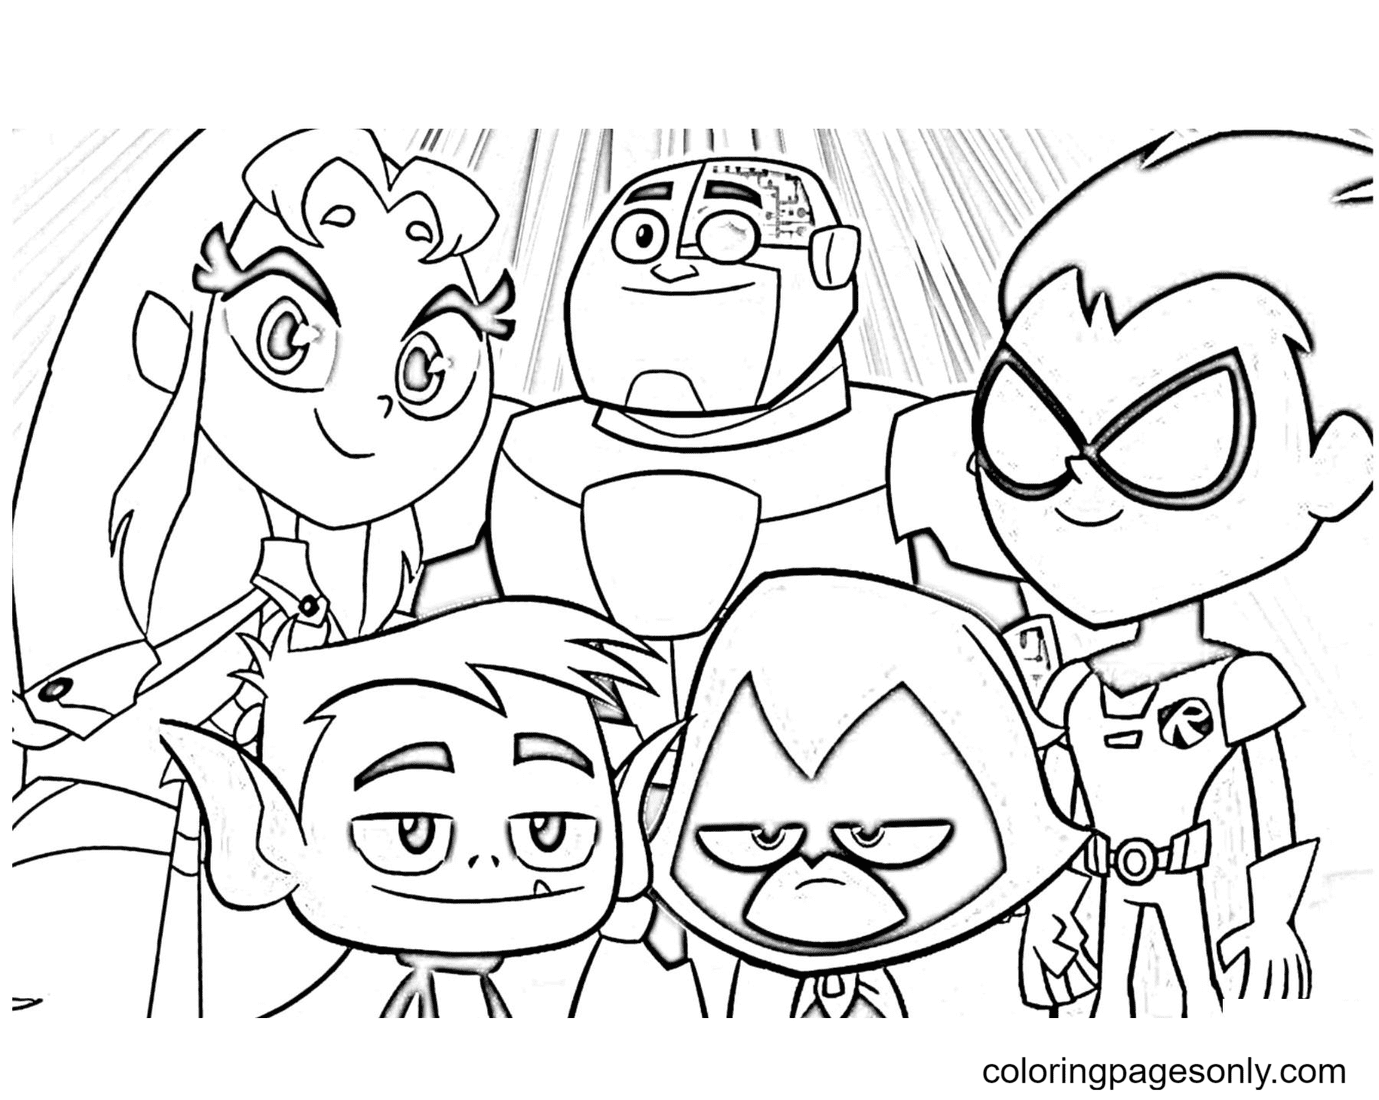 Teen Titans Go all characters Coloring Pages